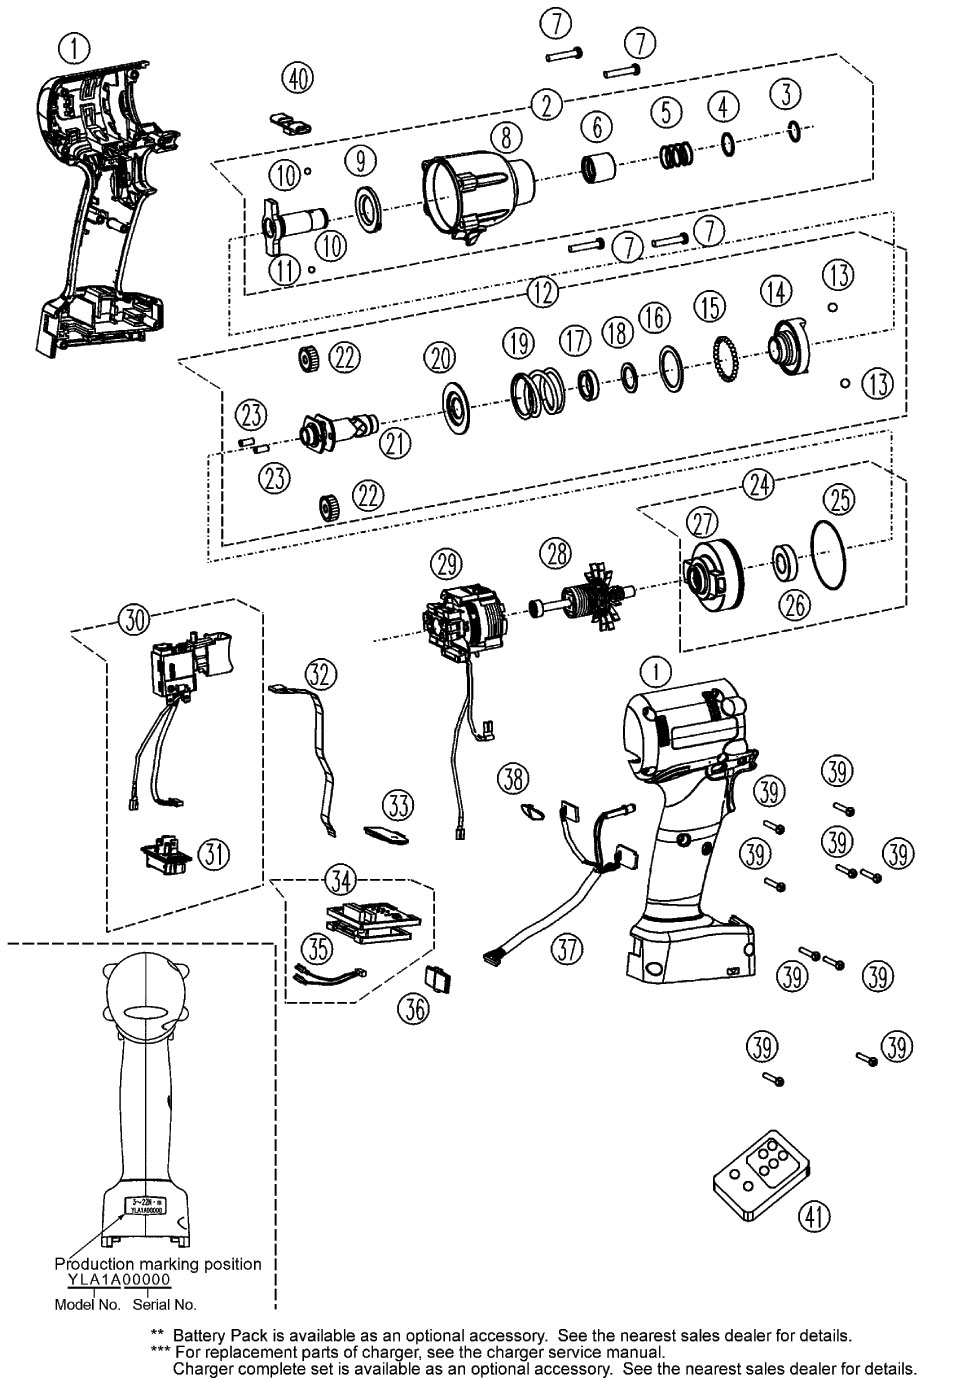 EYFLA1: Exploded View